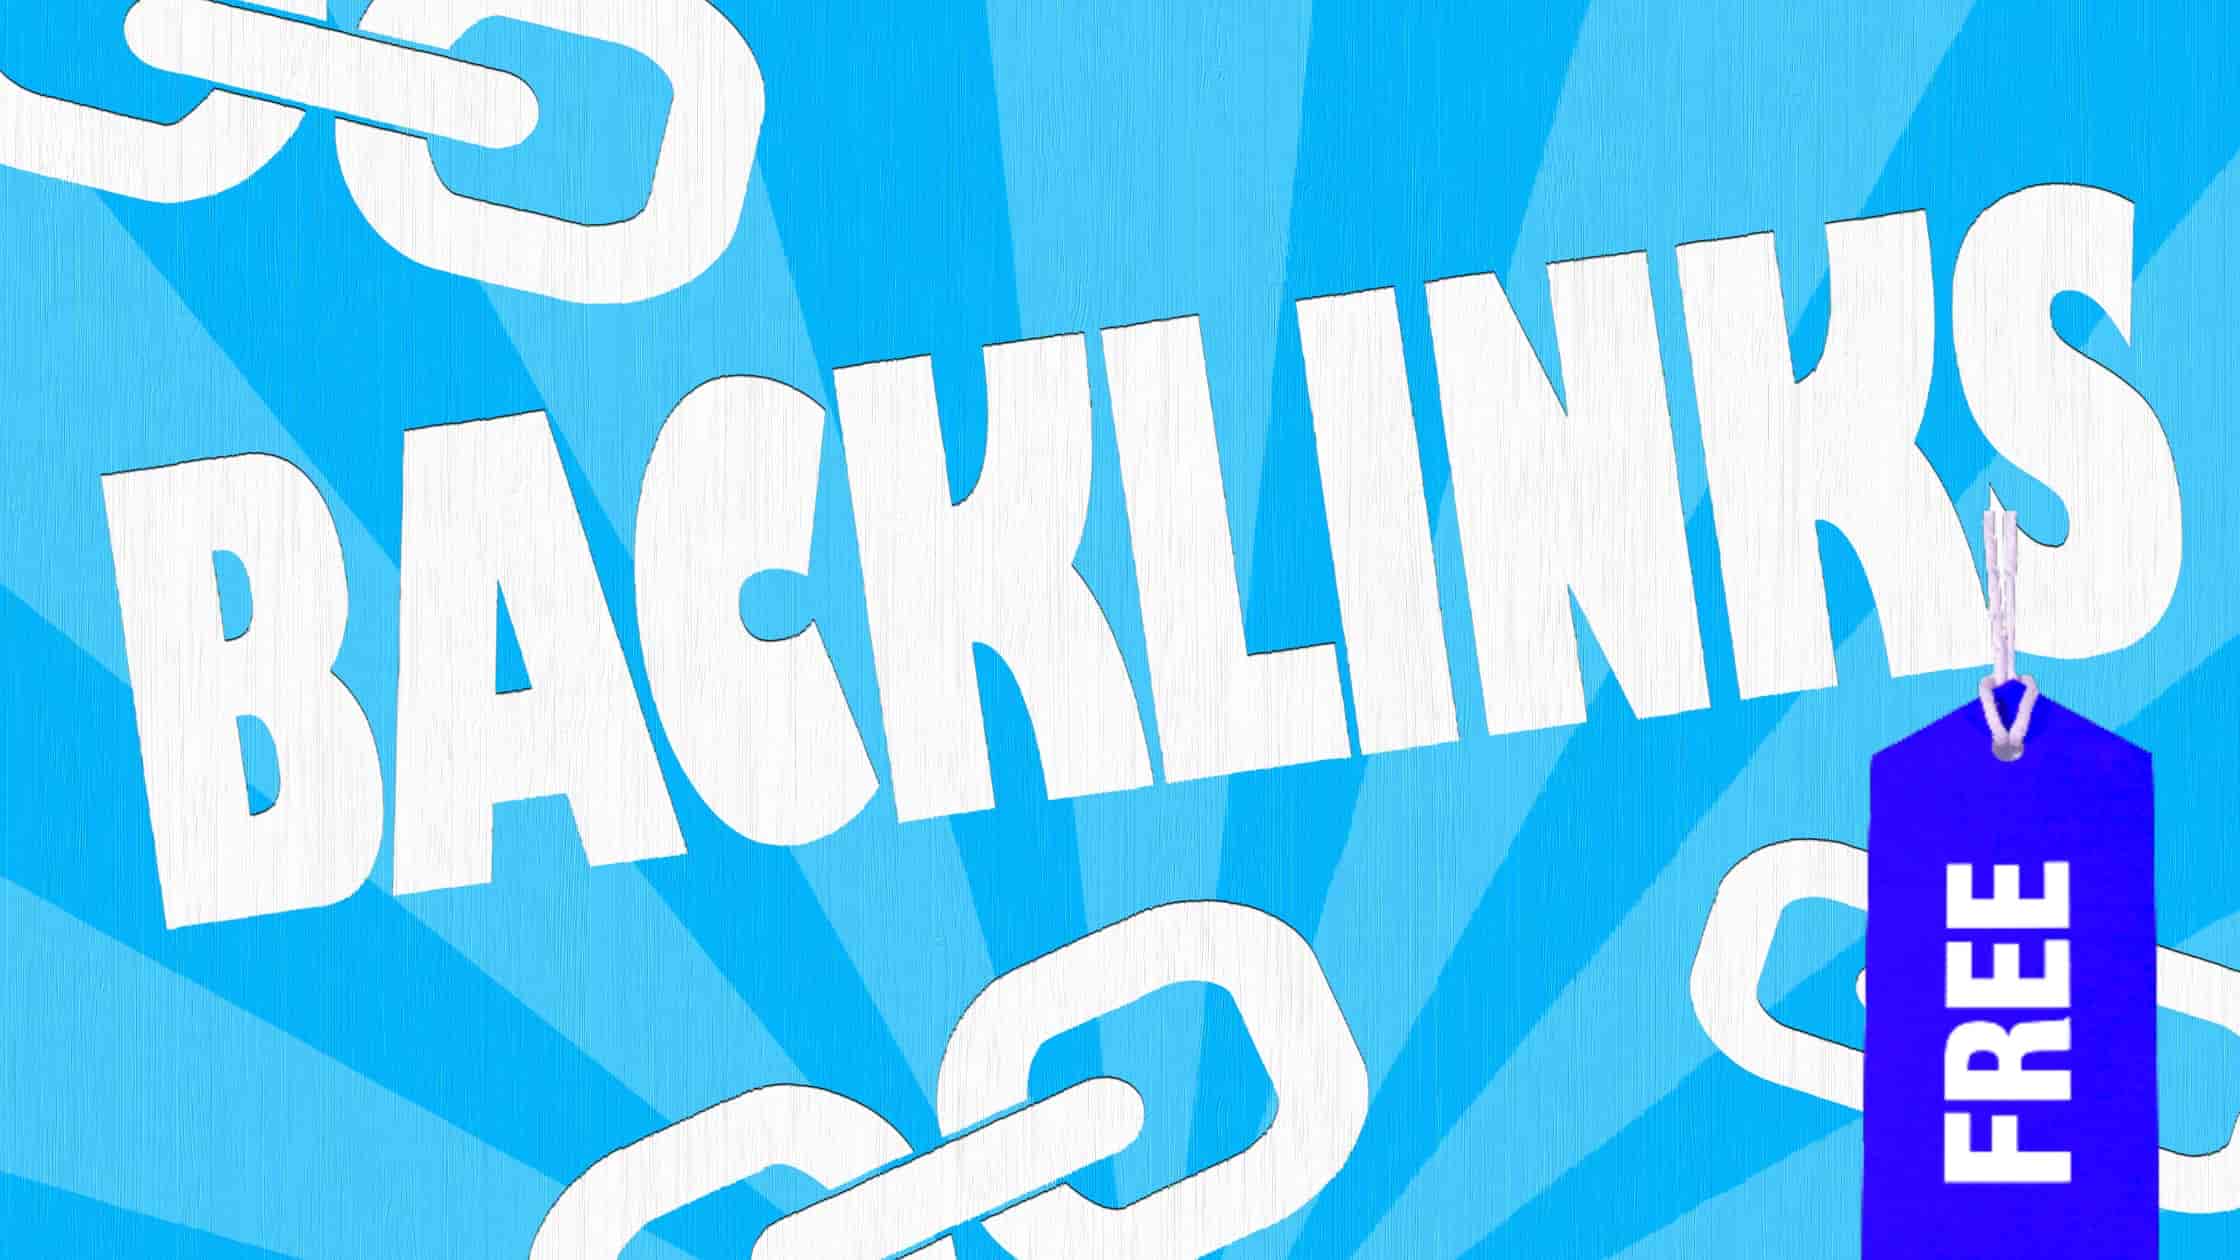 How to getFree backlinks blog banner for thaiseolinks